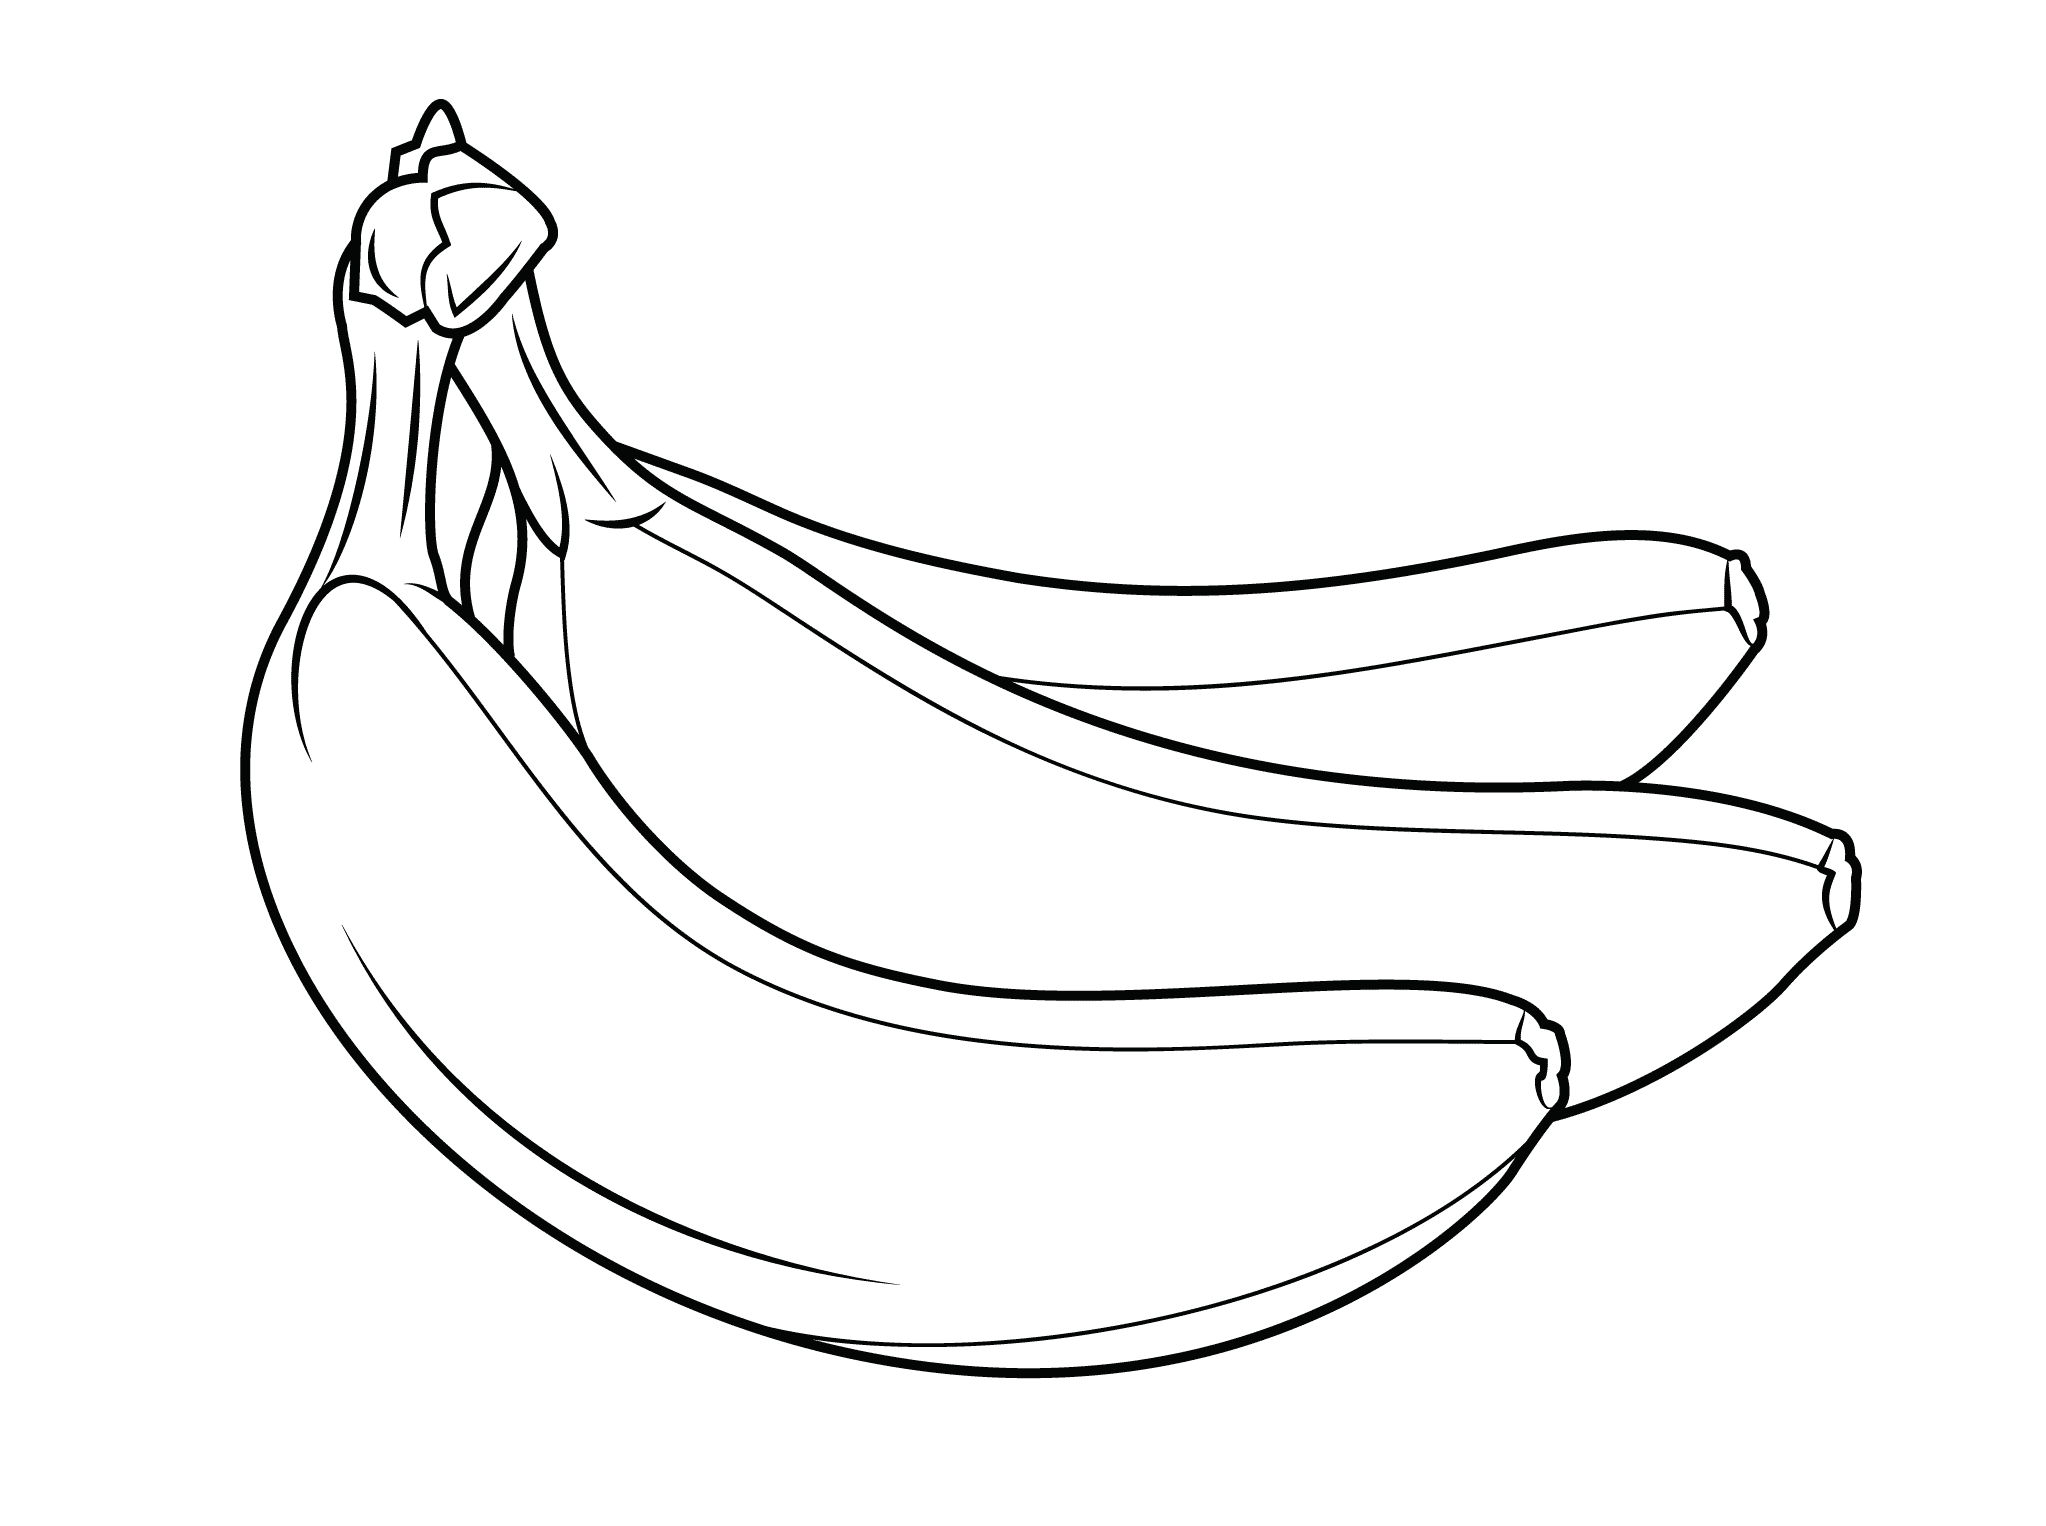 Banana Coloring Pages   Best Coloring Pages For Kids